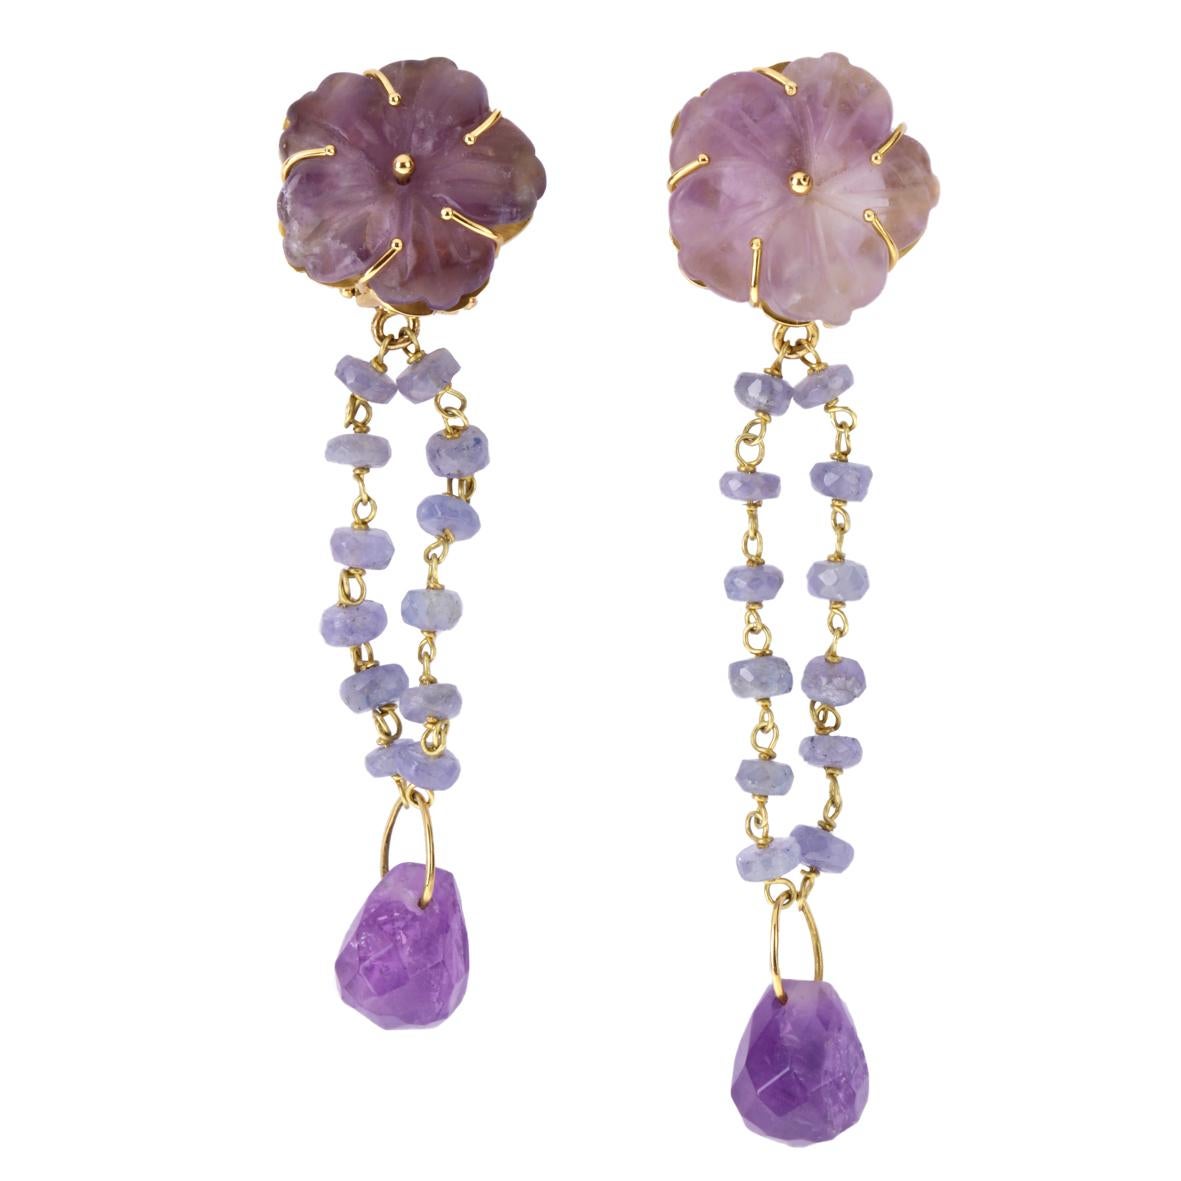 Earrings with carved amethyst flowers tanzanite and amethyst broil drops, gold 7,80gr, total length 6,5 cm, weight 7,4 gr.
All Giulia Colussi jewelry is new and has never been previously owned or worn. Each item will arrive at your door beautifully